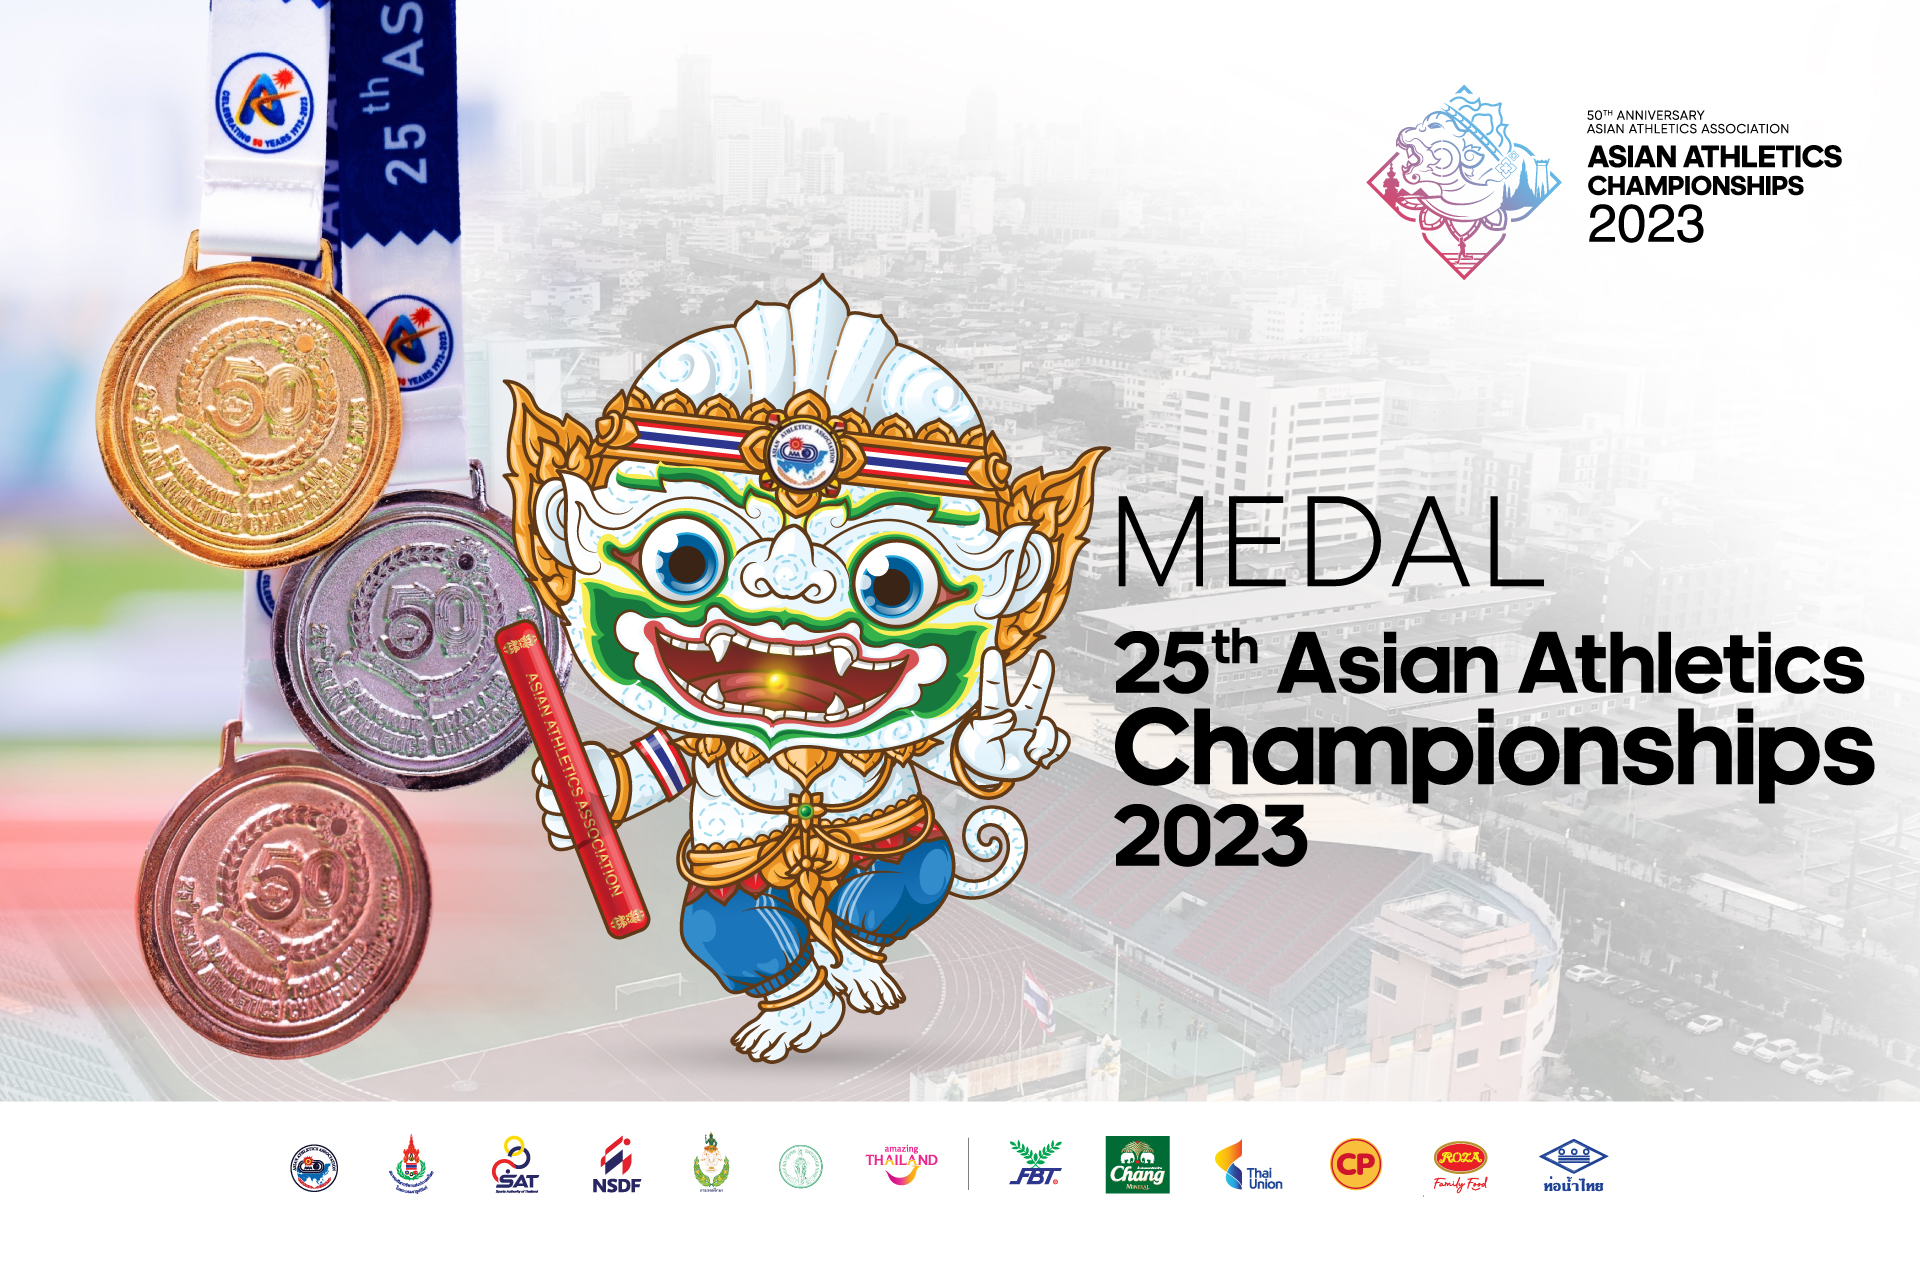 The medal awarded to successful competitors at “the 25th Asian Athletics Championships 2023”